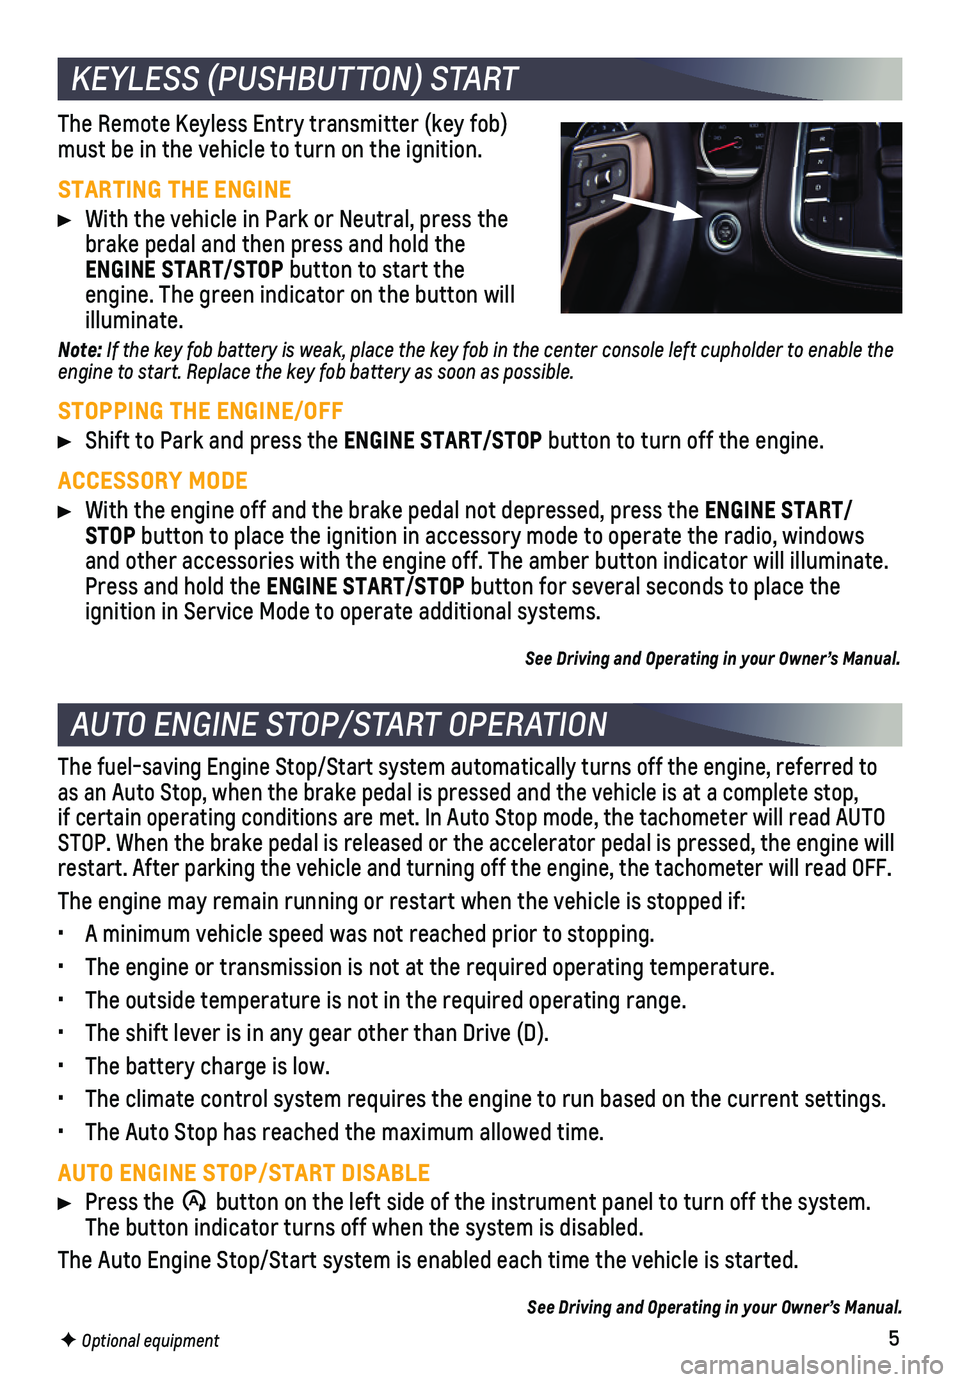 CHEVROLET SUBURBAN 2021  Get To Know Guide 5F Optional equipment
The fuel-saving Engine Stop/Start system automatically turns off the eng\
ine, referred to as an Auto Stop, when the brake pedal is pressed and the vehicle is at a\
 complete sto